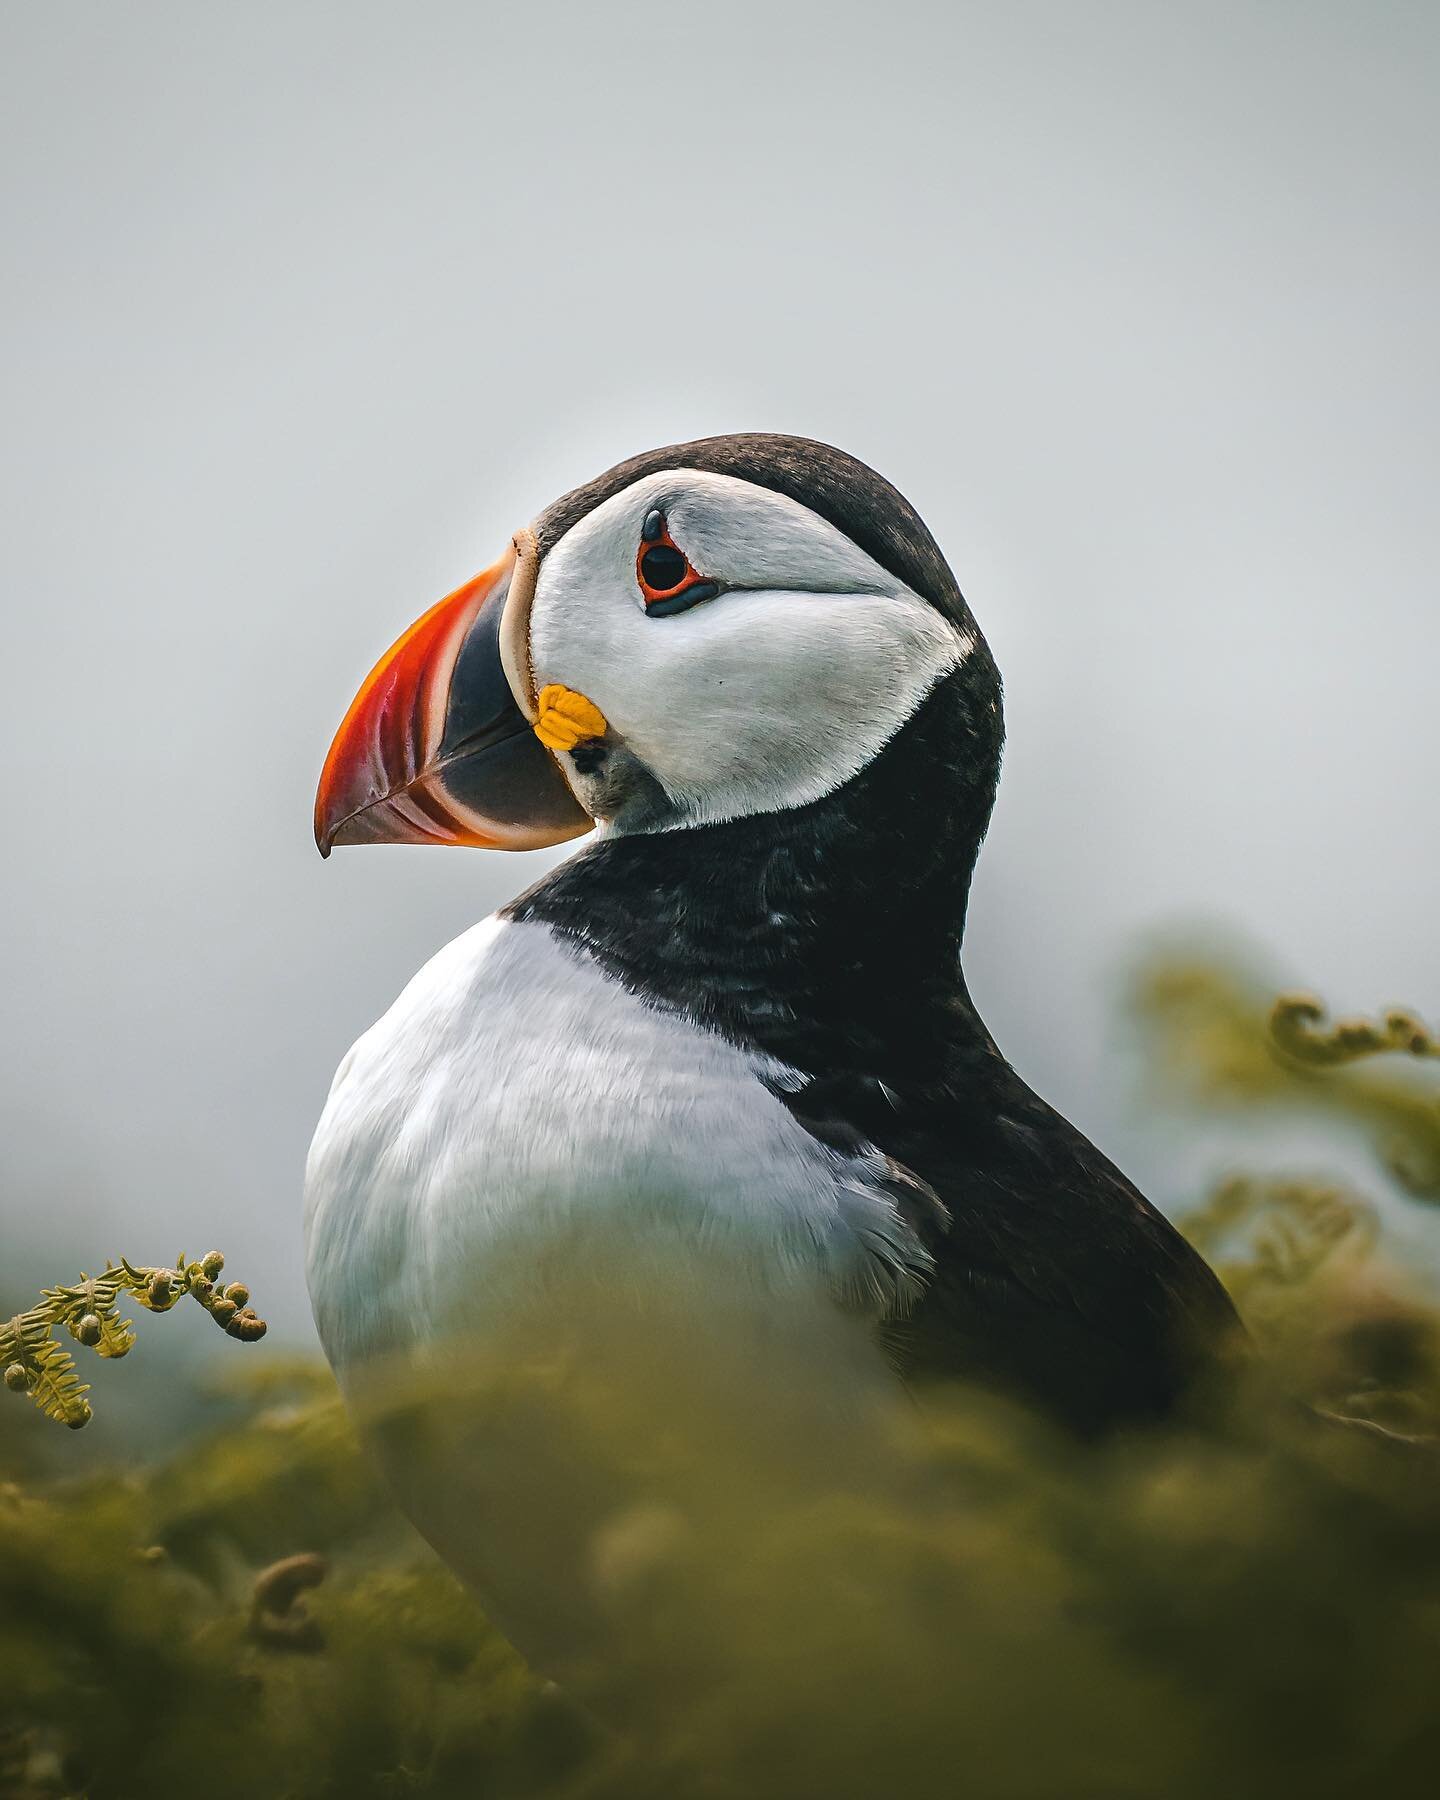 We&rsquo;re off to Skomer again next week to spend a few days on the island. No puffins this time but definitely Manx Shearwater and hopefully I can spot some other exciting wildlife! 

Heading up to North Wales this evening too so fingers crossed th